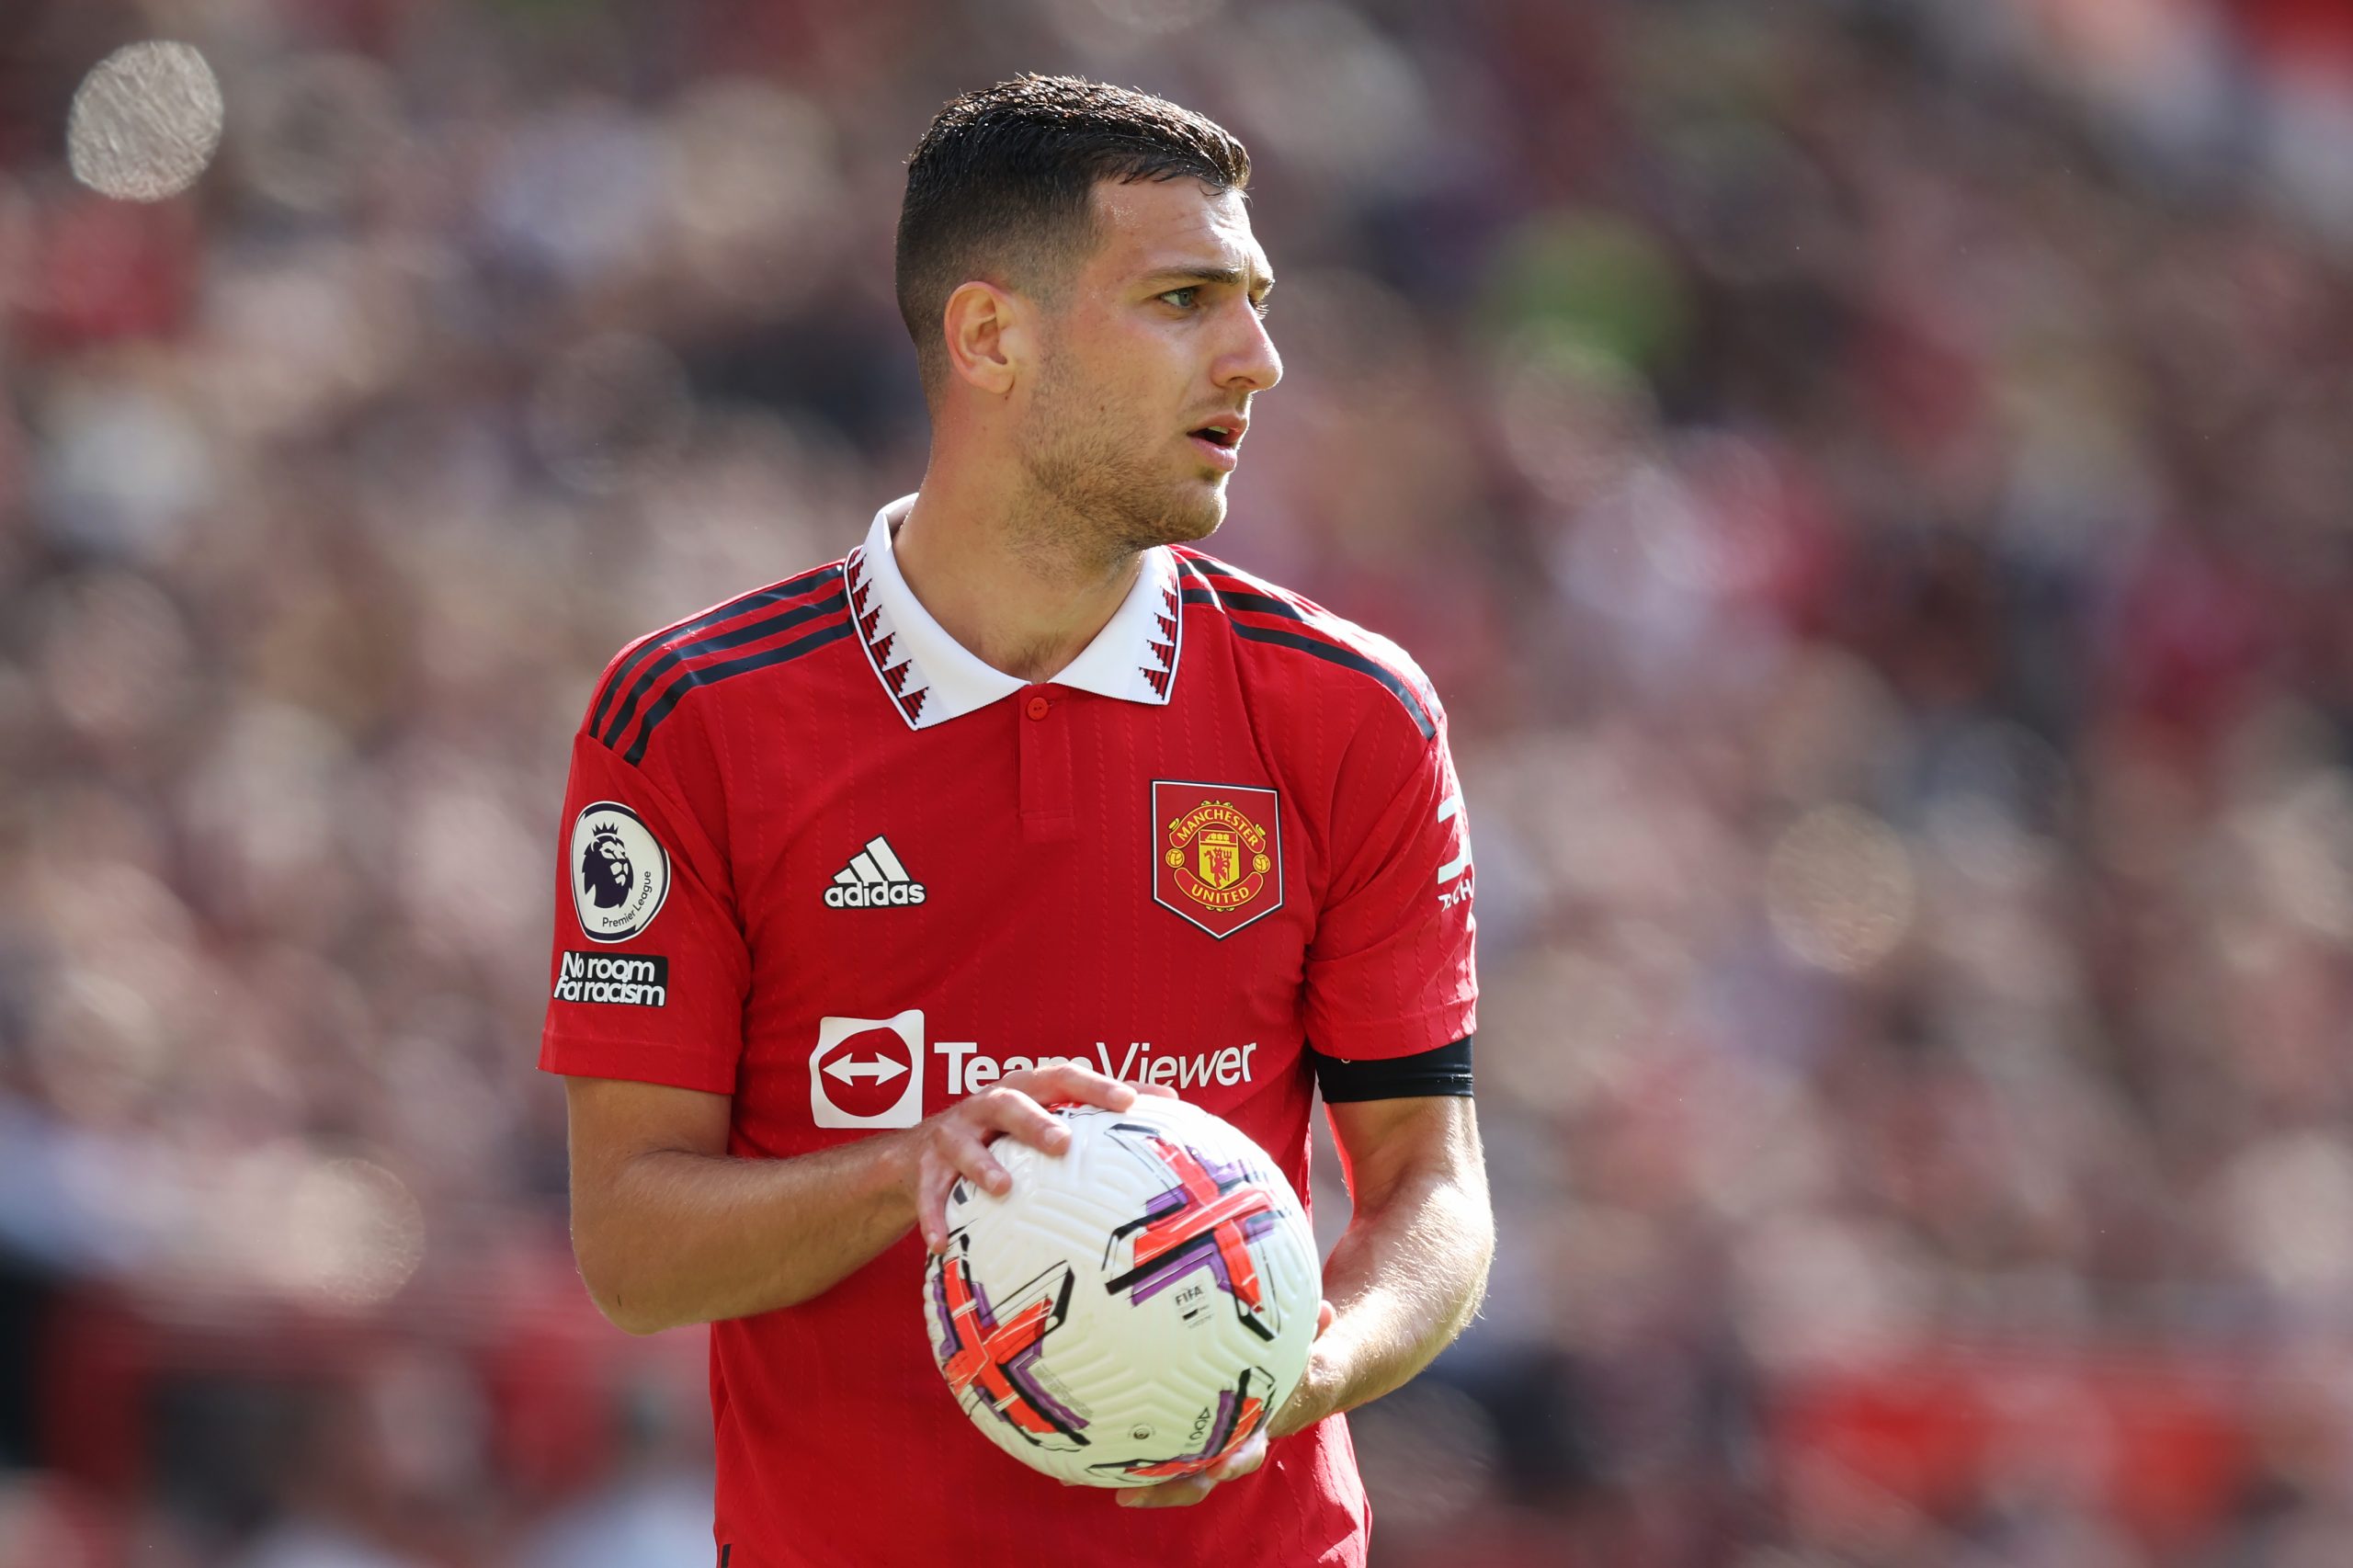 Diogo Dalot of Manchester United (Photo by Matt McNulty/Getty Images)